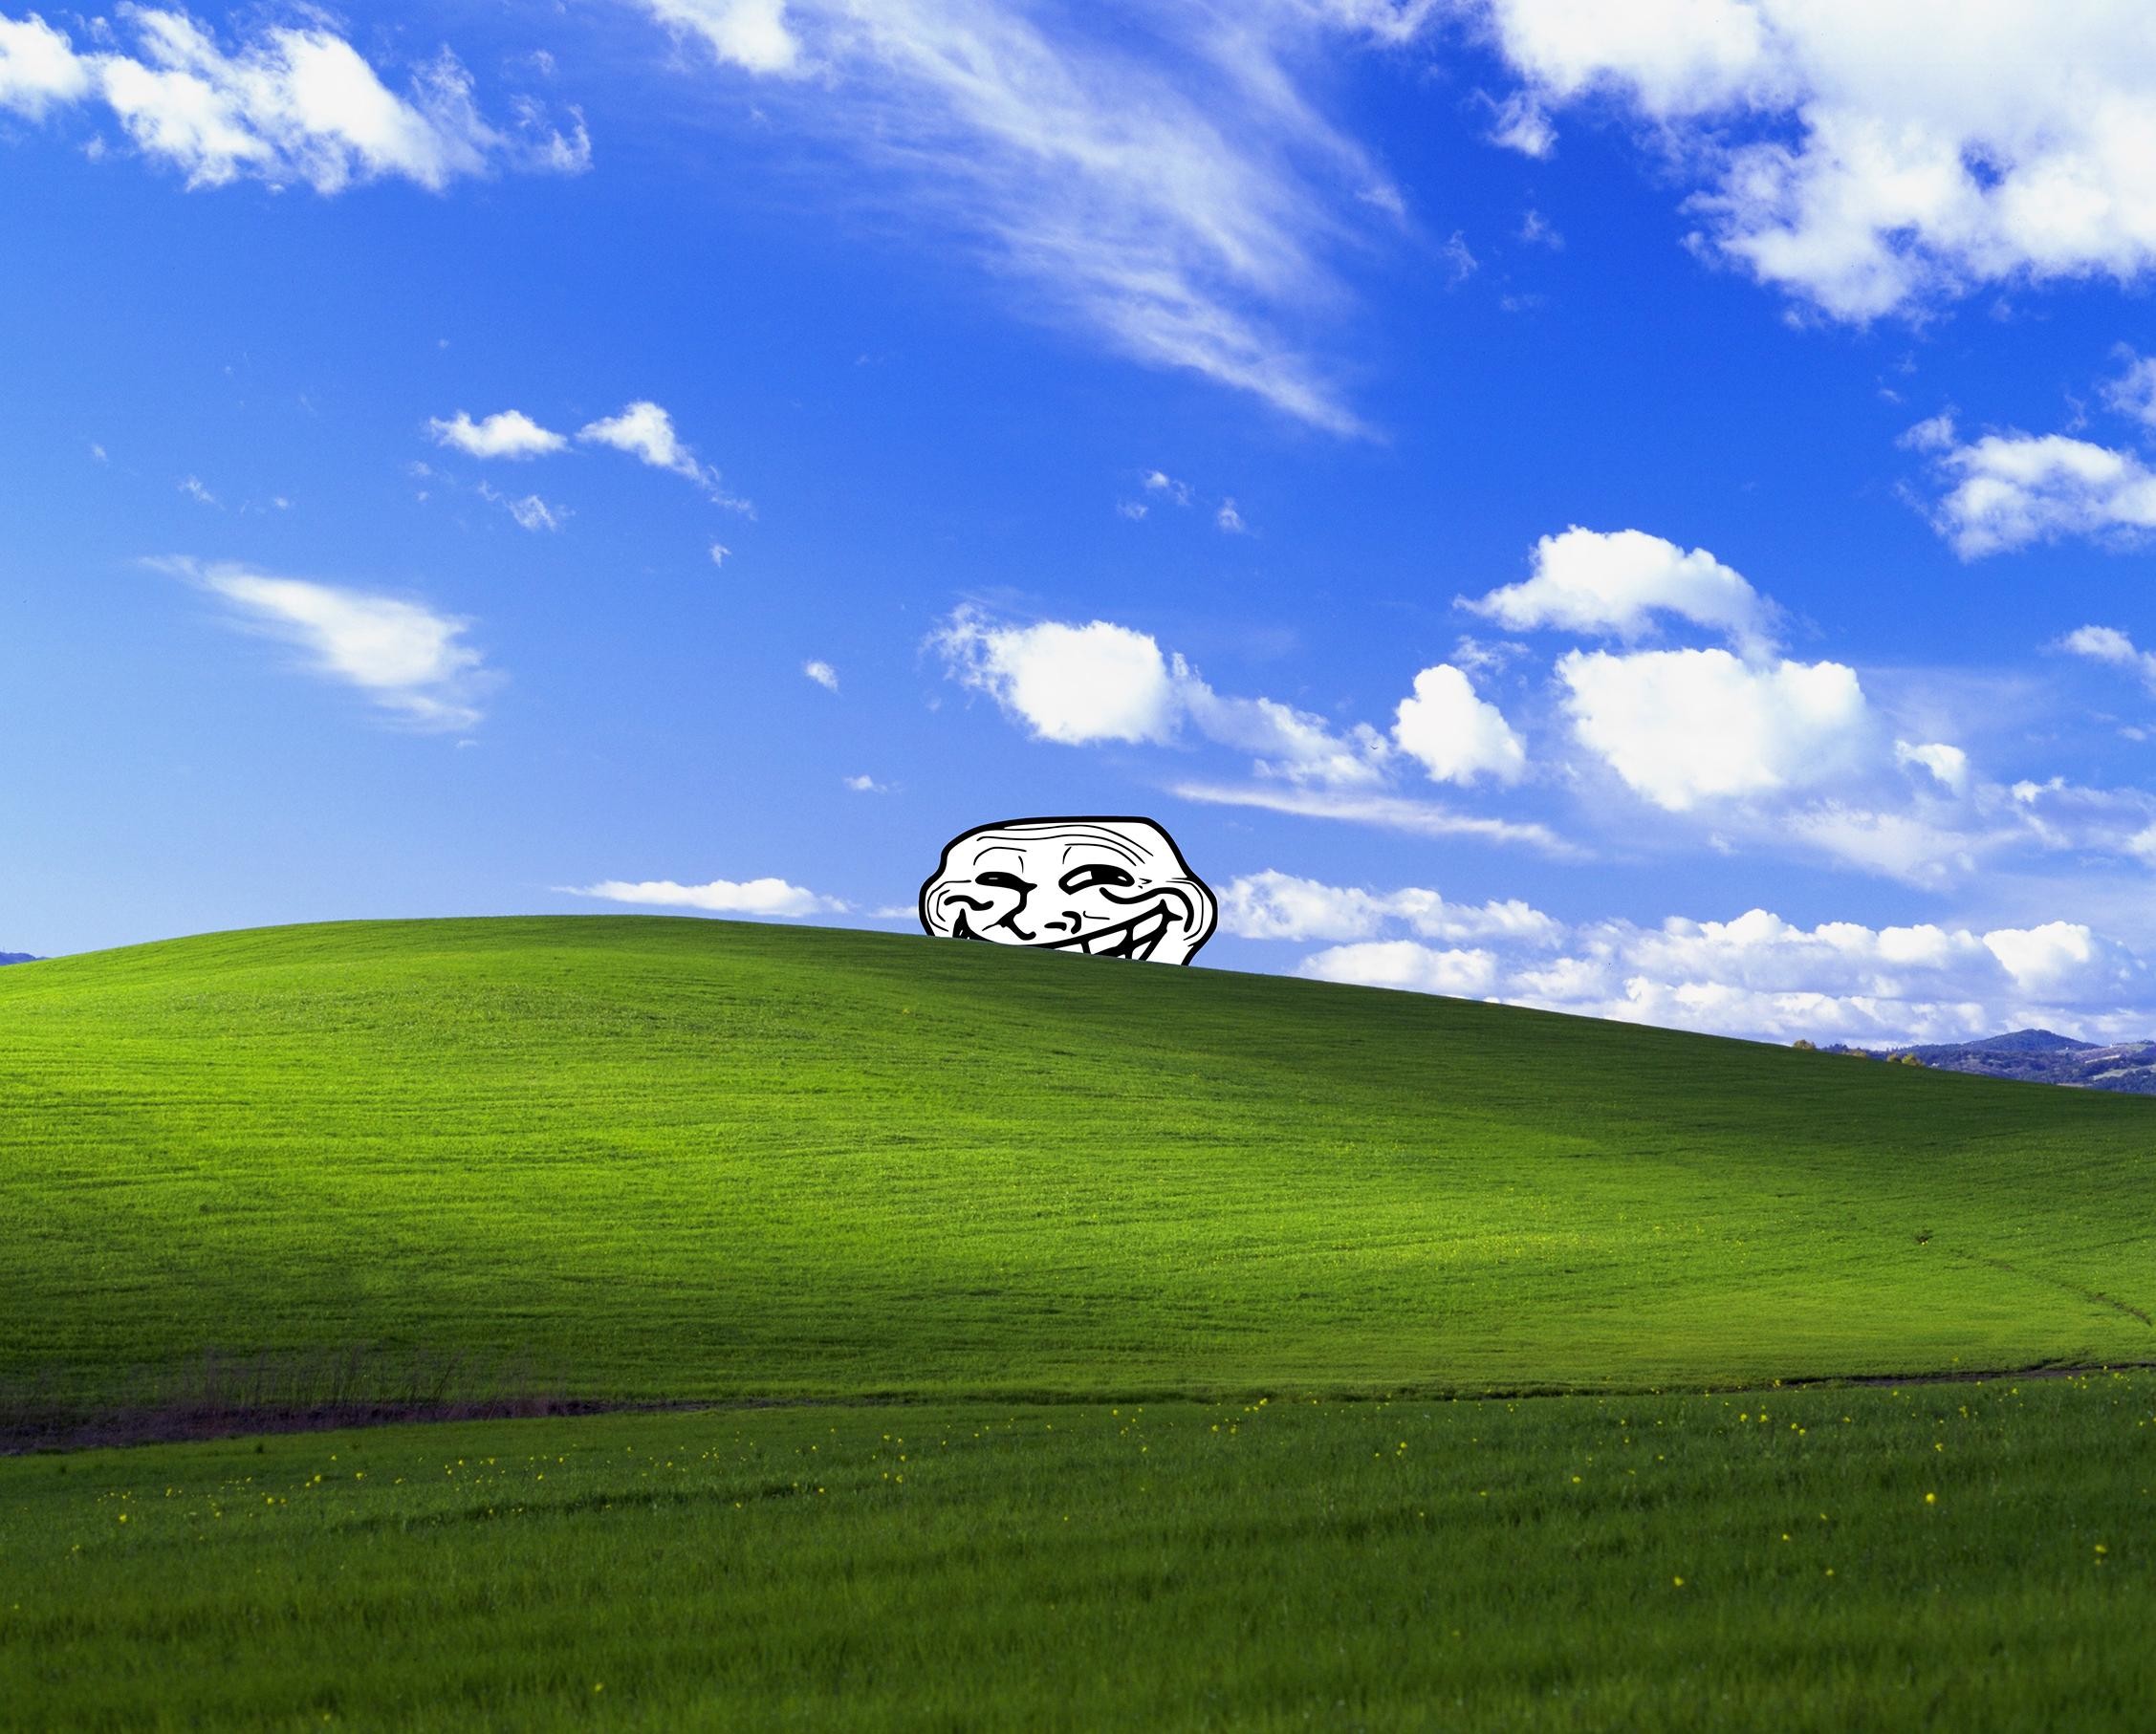 Troll face peeking out from behind the old Bliss wallpaper hill 2255×1814